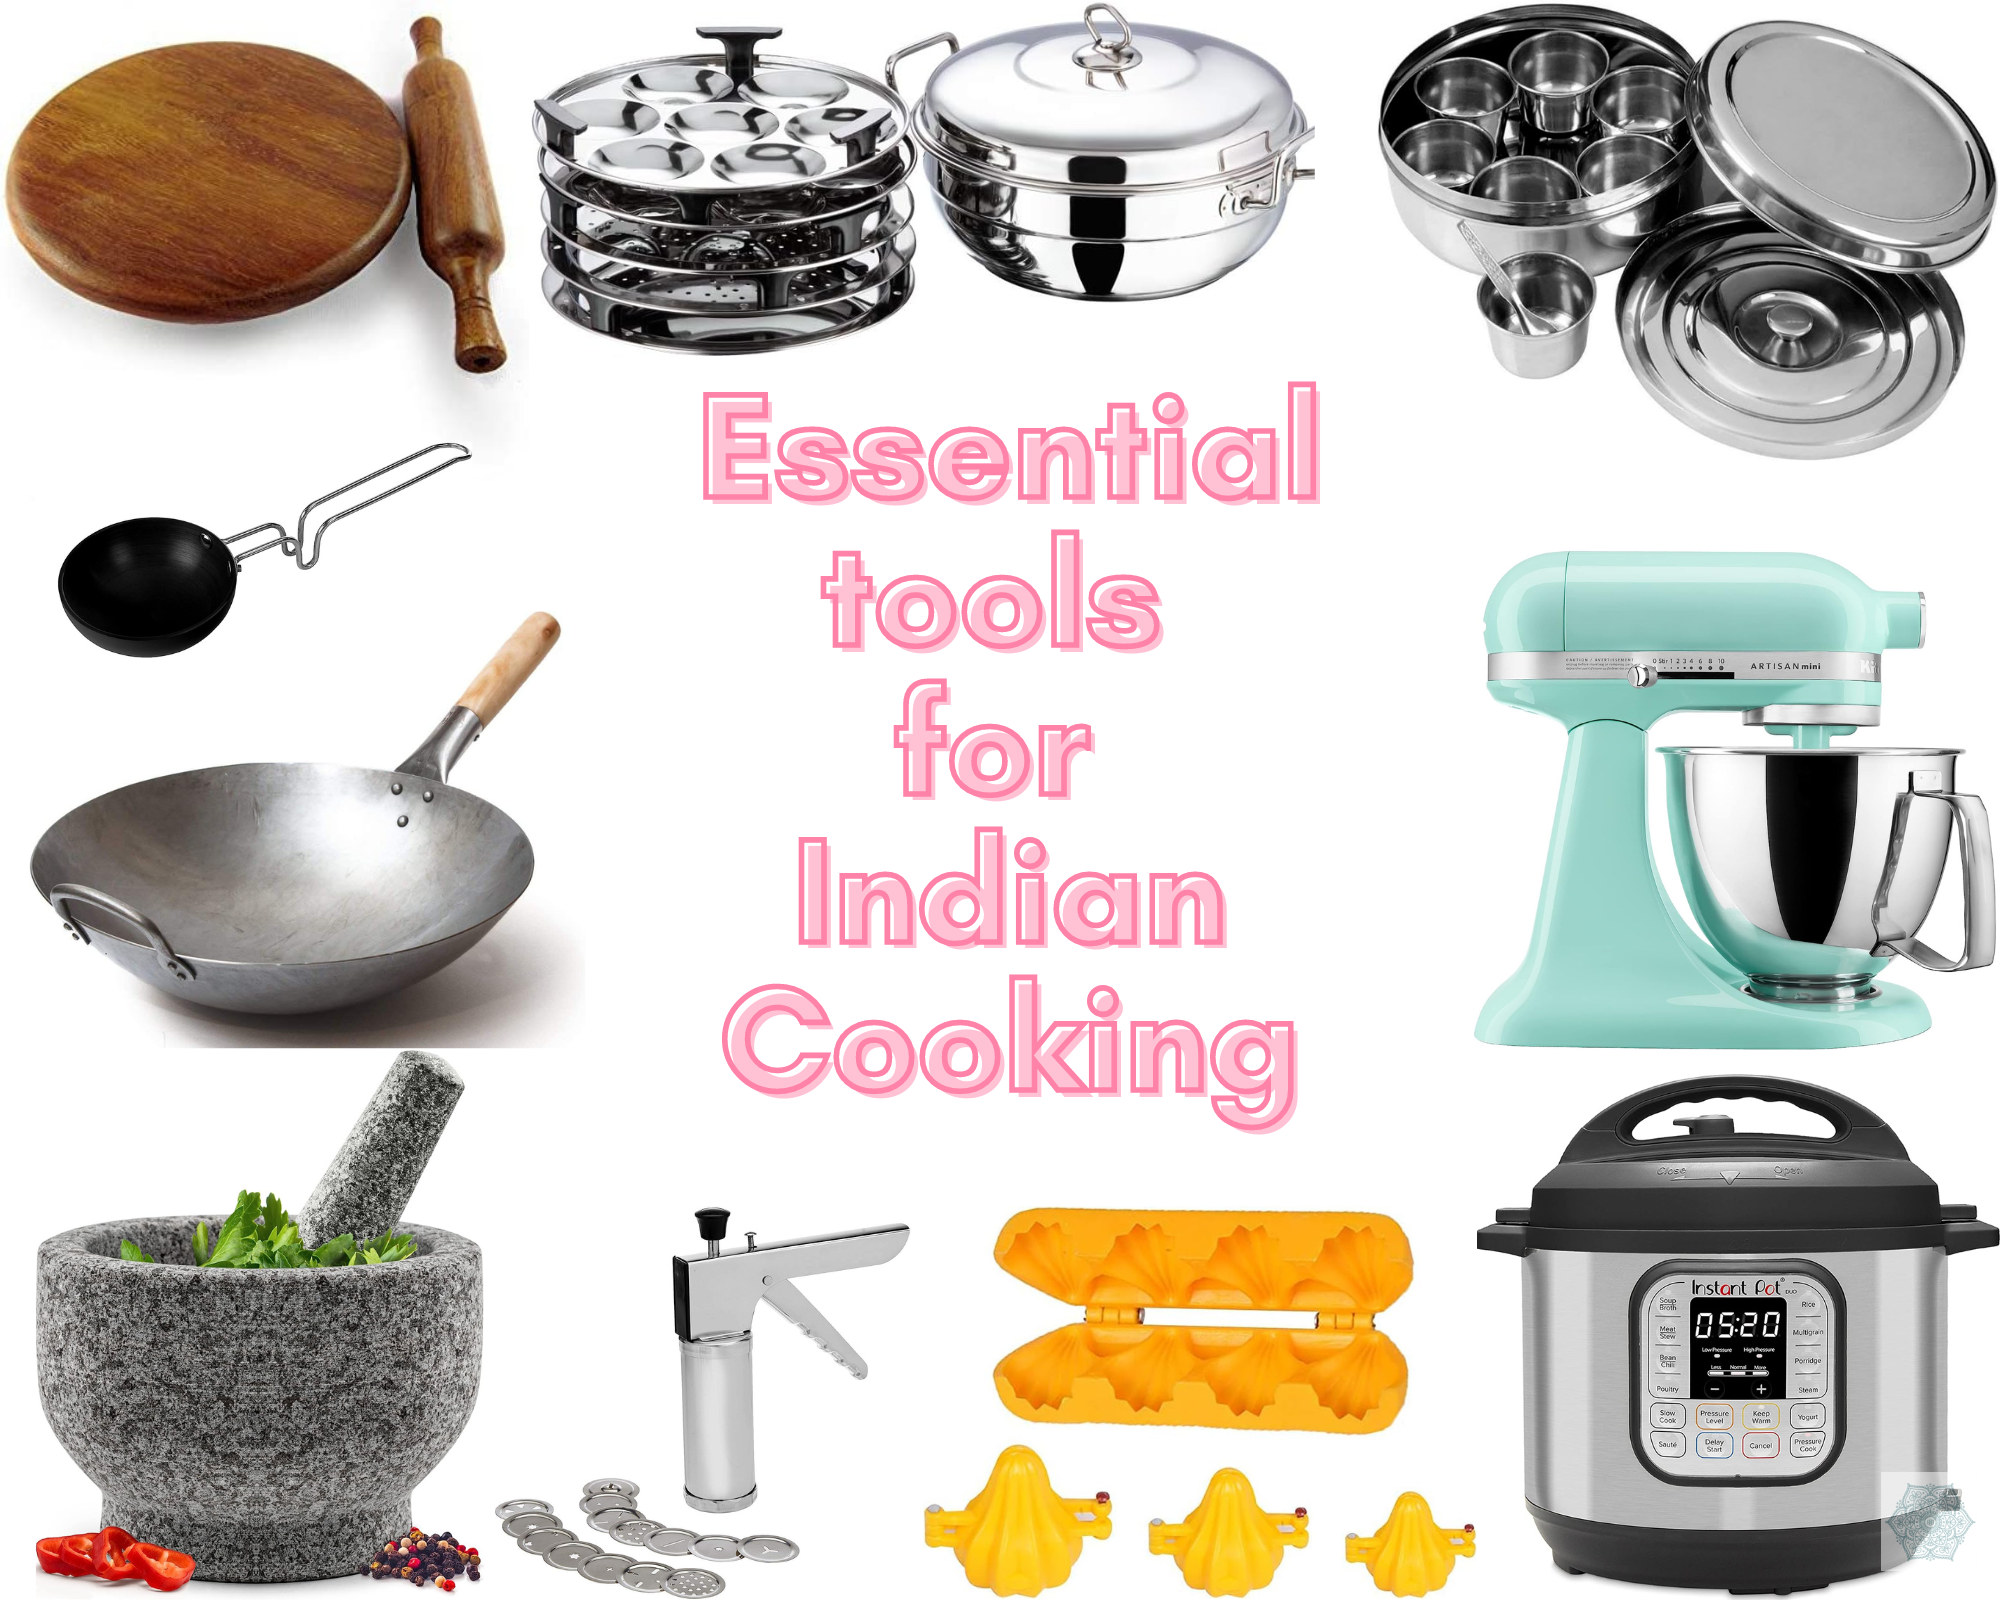 Essential tools for Indian Cooking